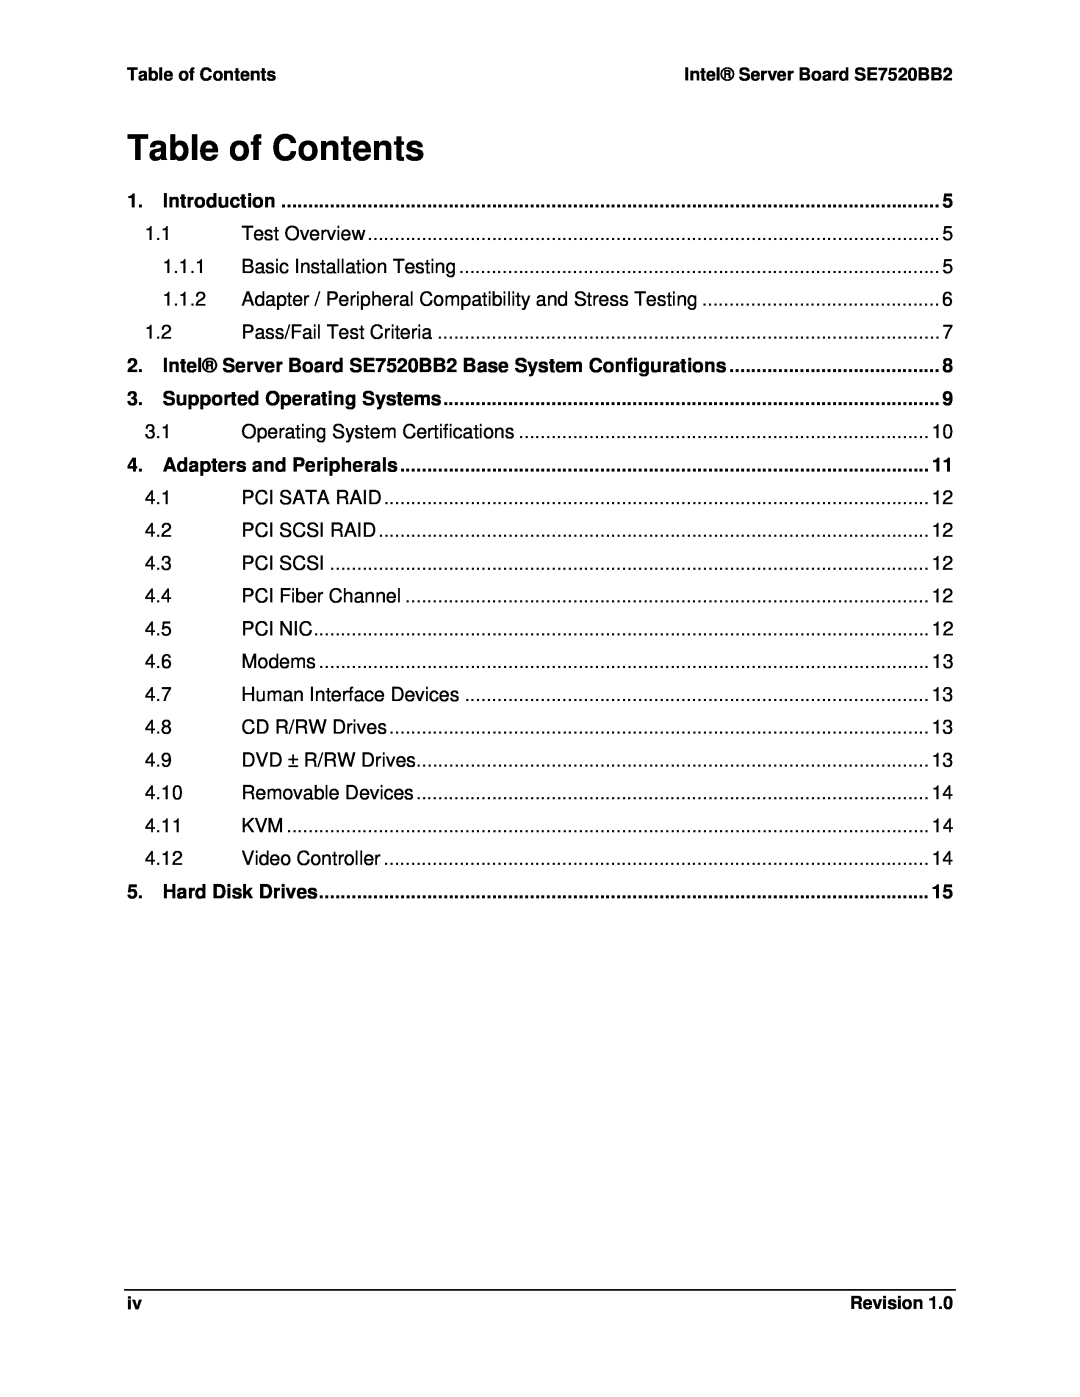 Intel SE7520BB2 manual Introduction, Table of Contents 